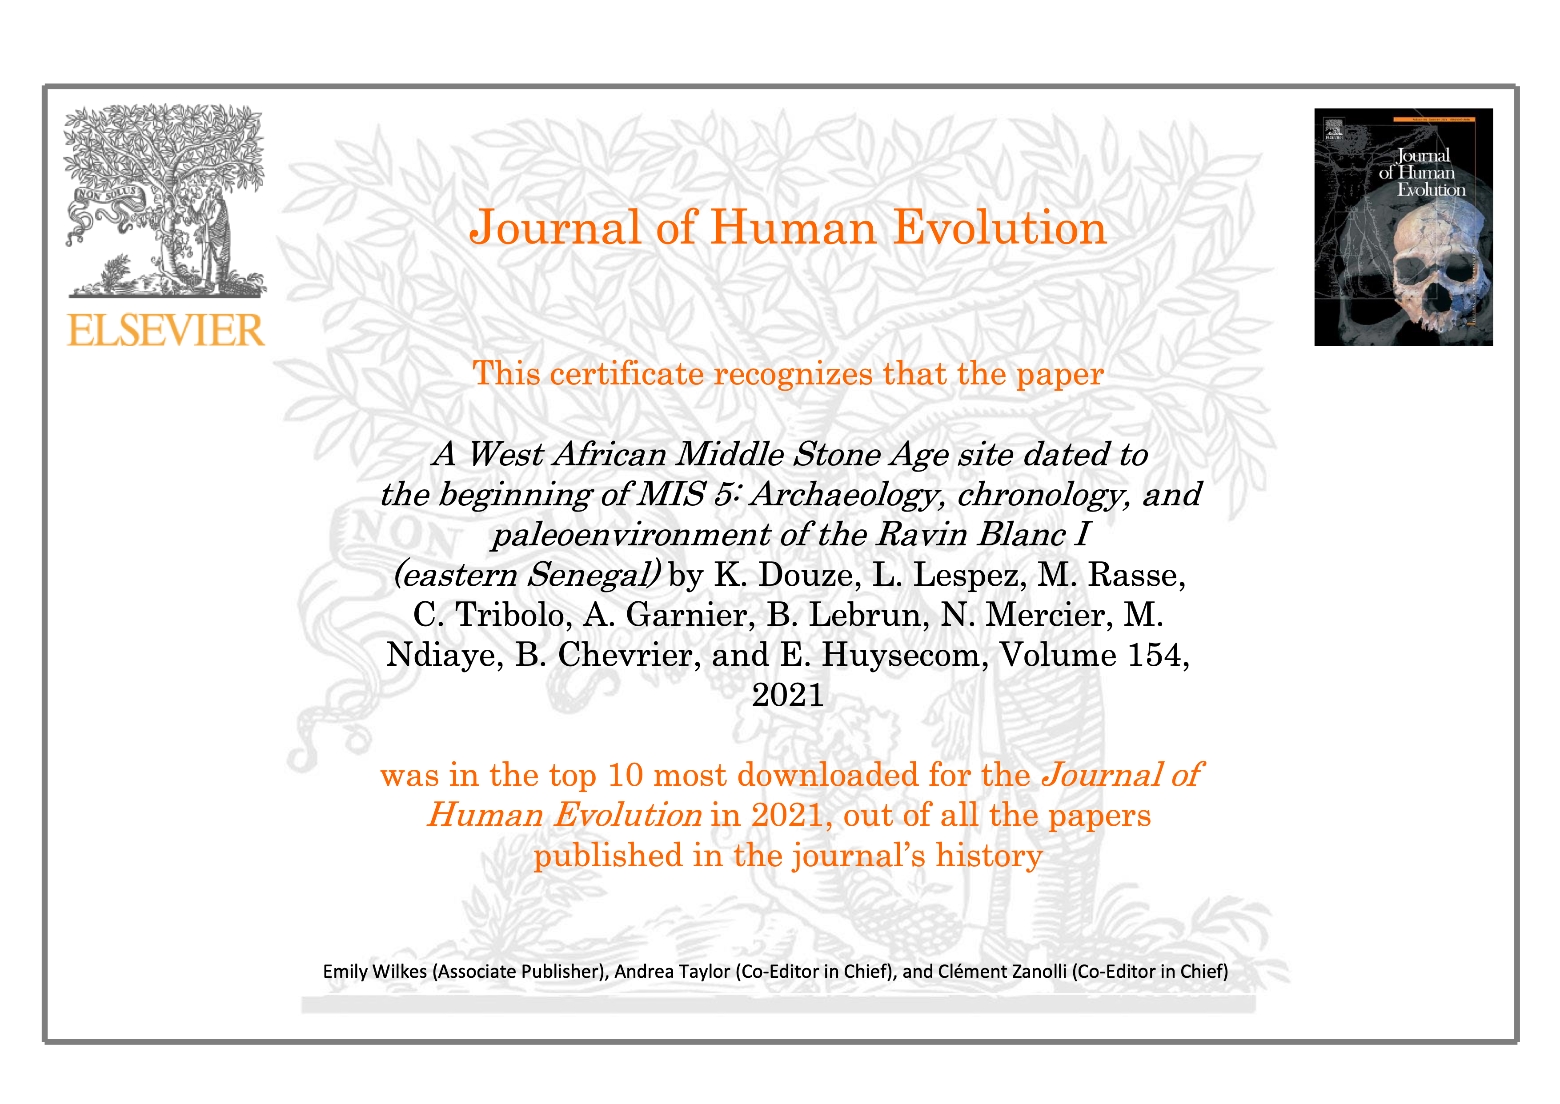 Top 10 most downloaded for the Journal of Human Evolution in 2021